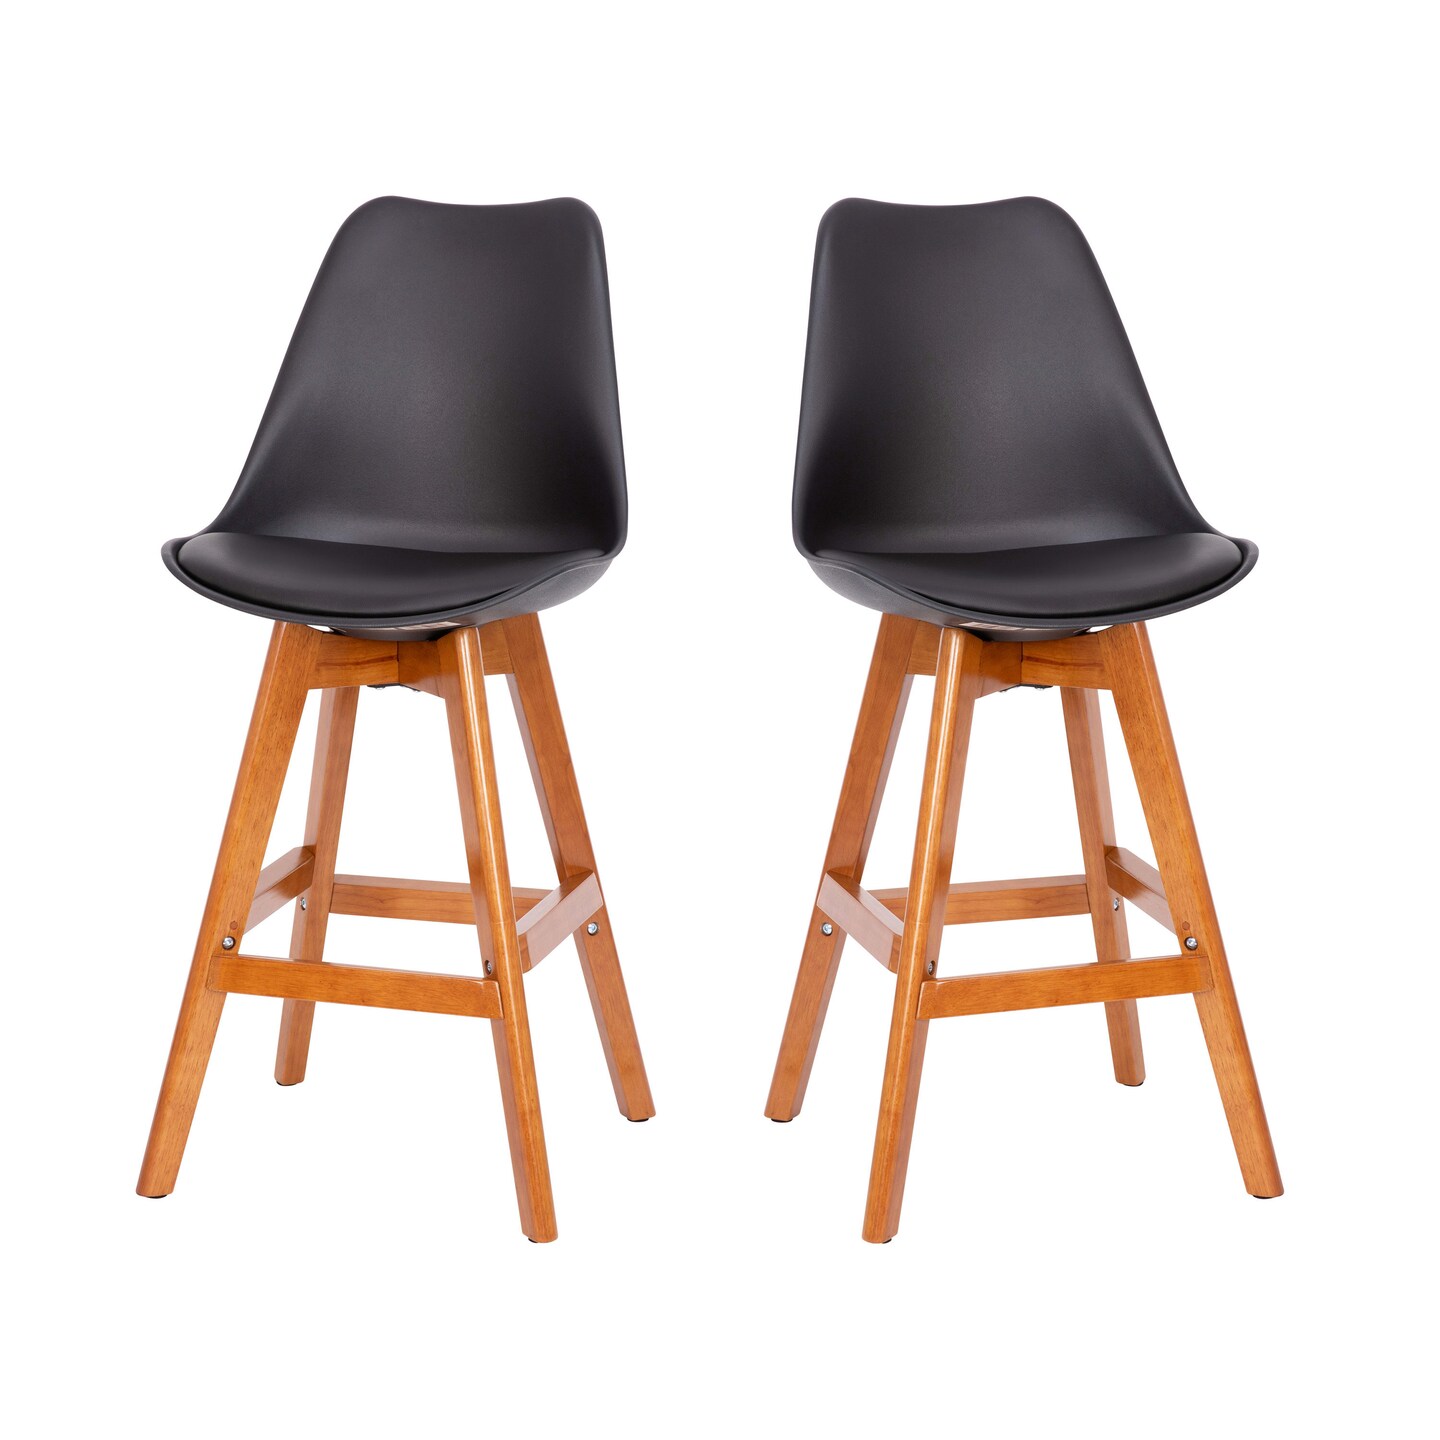 Emma and Oliver Foster Set of Two Upholstered Dining Stools with Matching Attached Seat and Wood Frame